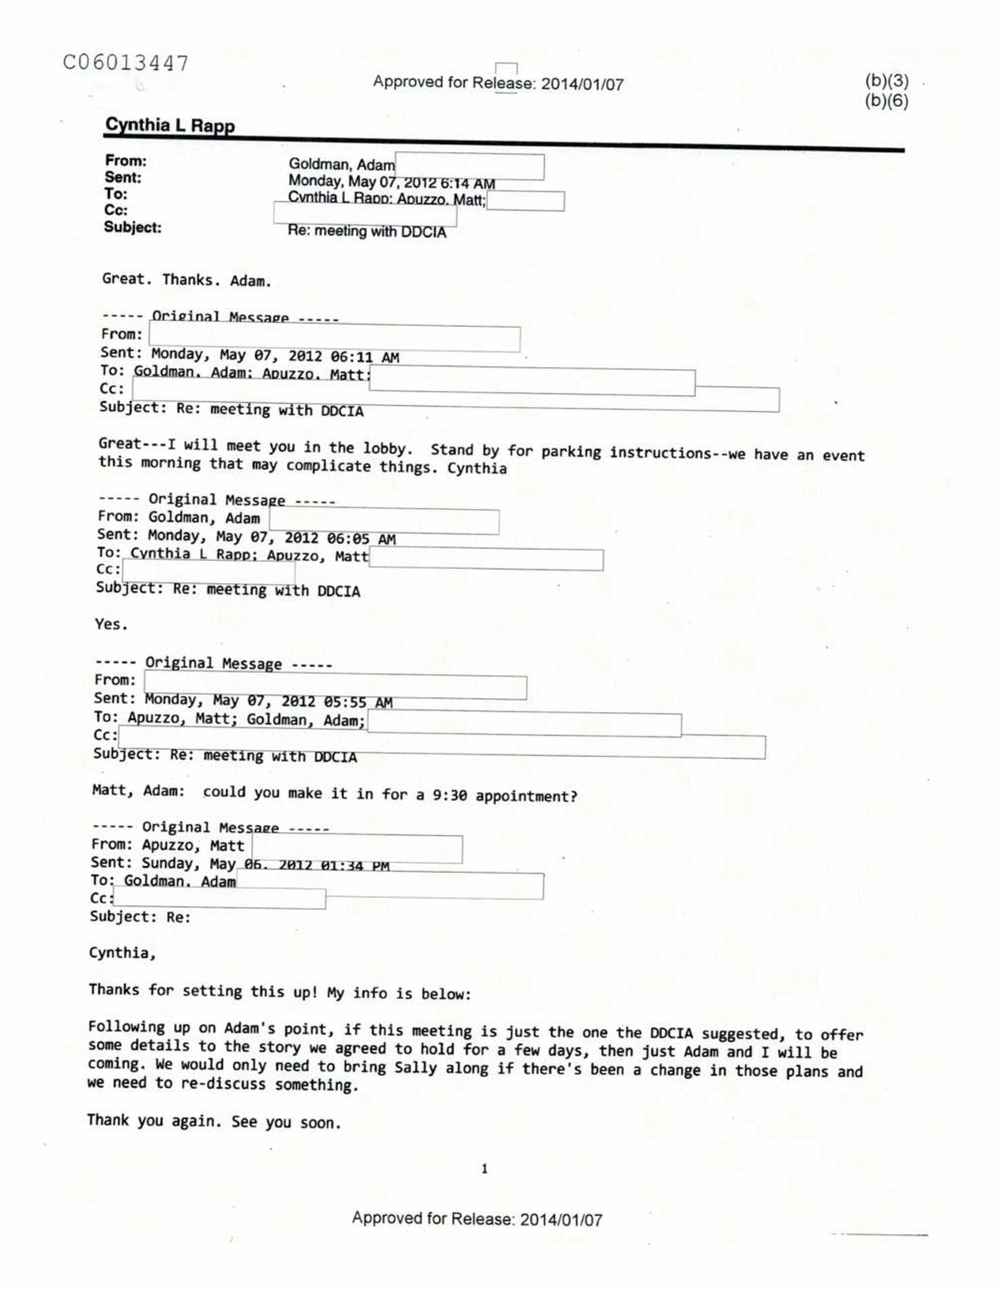 Page 310 from Email Correspondence Between Reporters and CIA Flacks